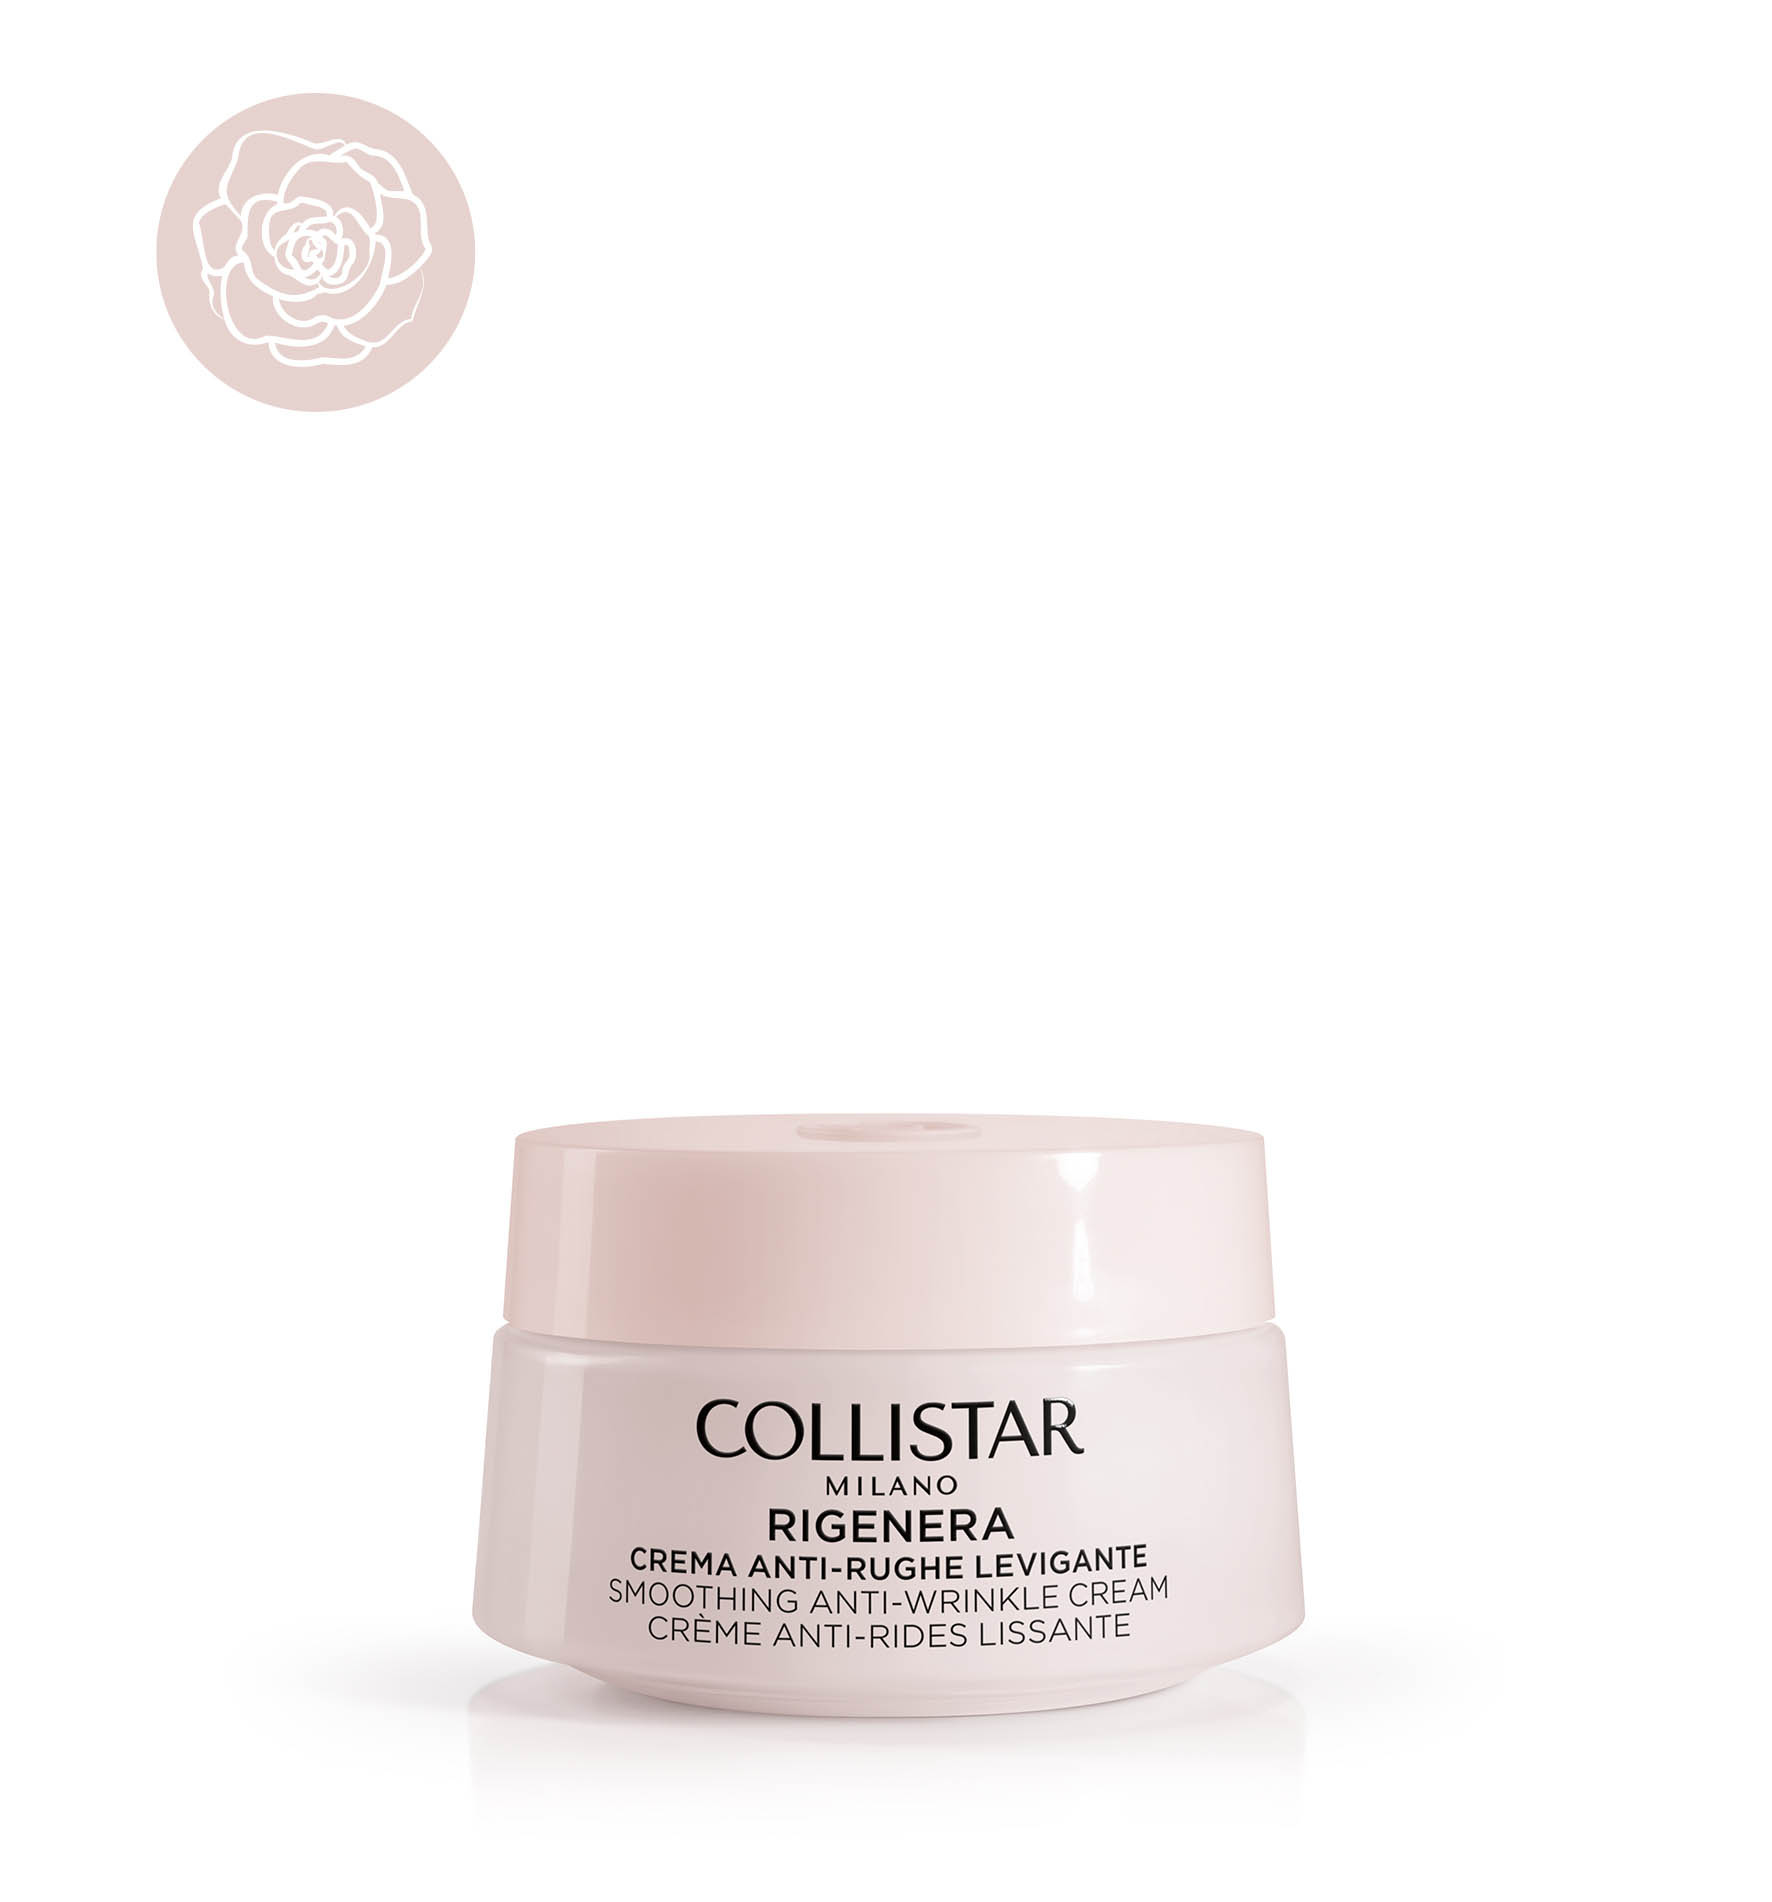 RIGENERA SMOOTHING ANTI-WRINKLE CREAM - Face | Collistar - Shop Online Ufficiale